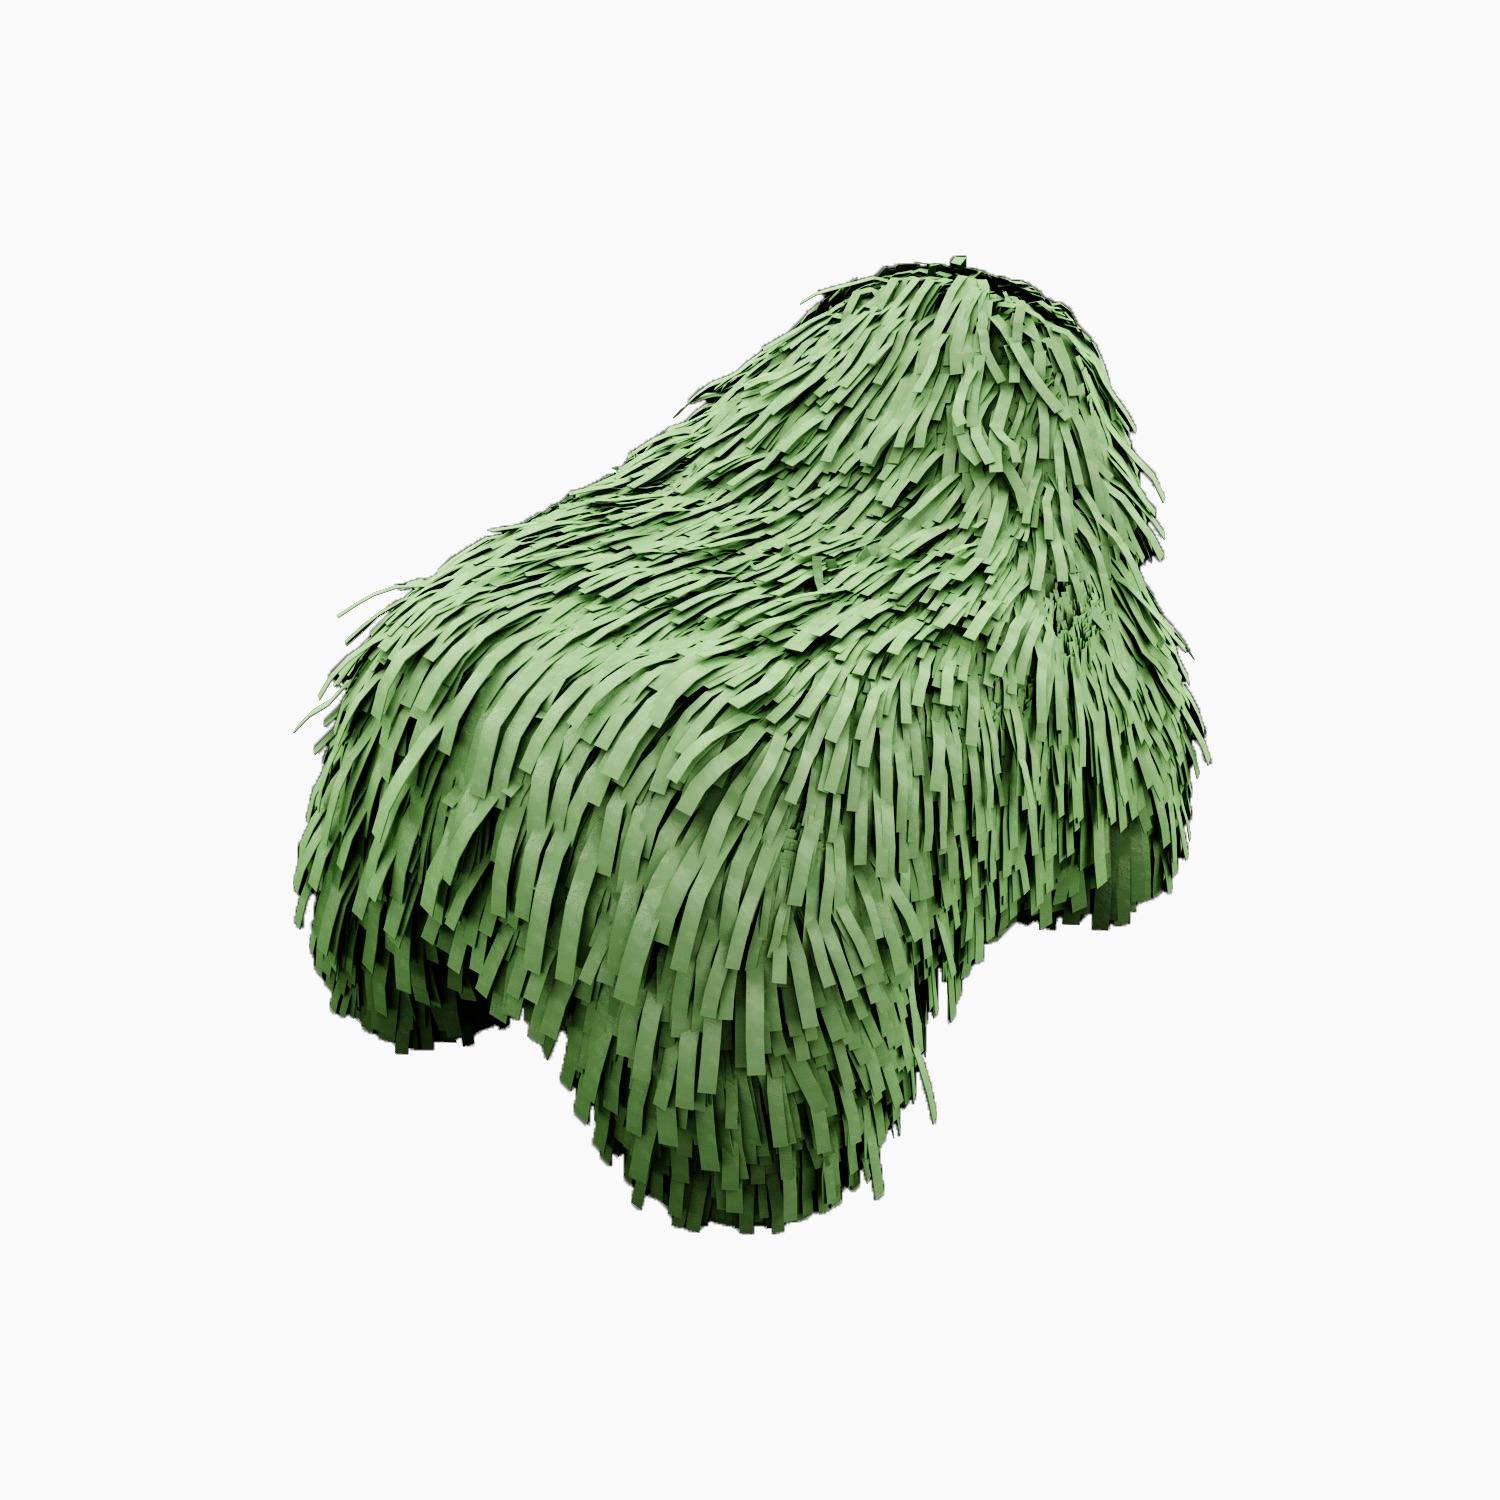 Puppy Pouffe green is a hip little seat with luxurious shaggy suede. This cute piece of furniture is a delight around the house like a new pup

For his debut creations, Marcantonio introduced “Vegetal Animal”, a concept that evokes strong emotions